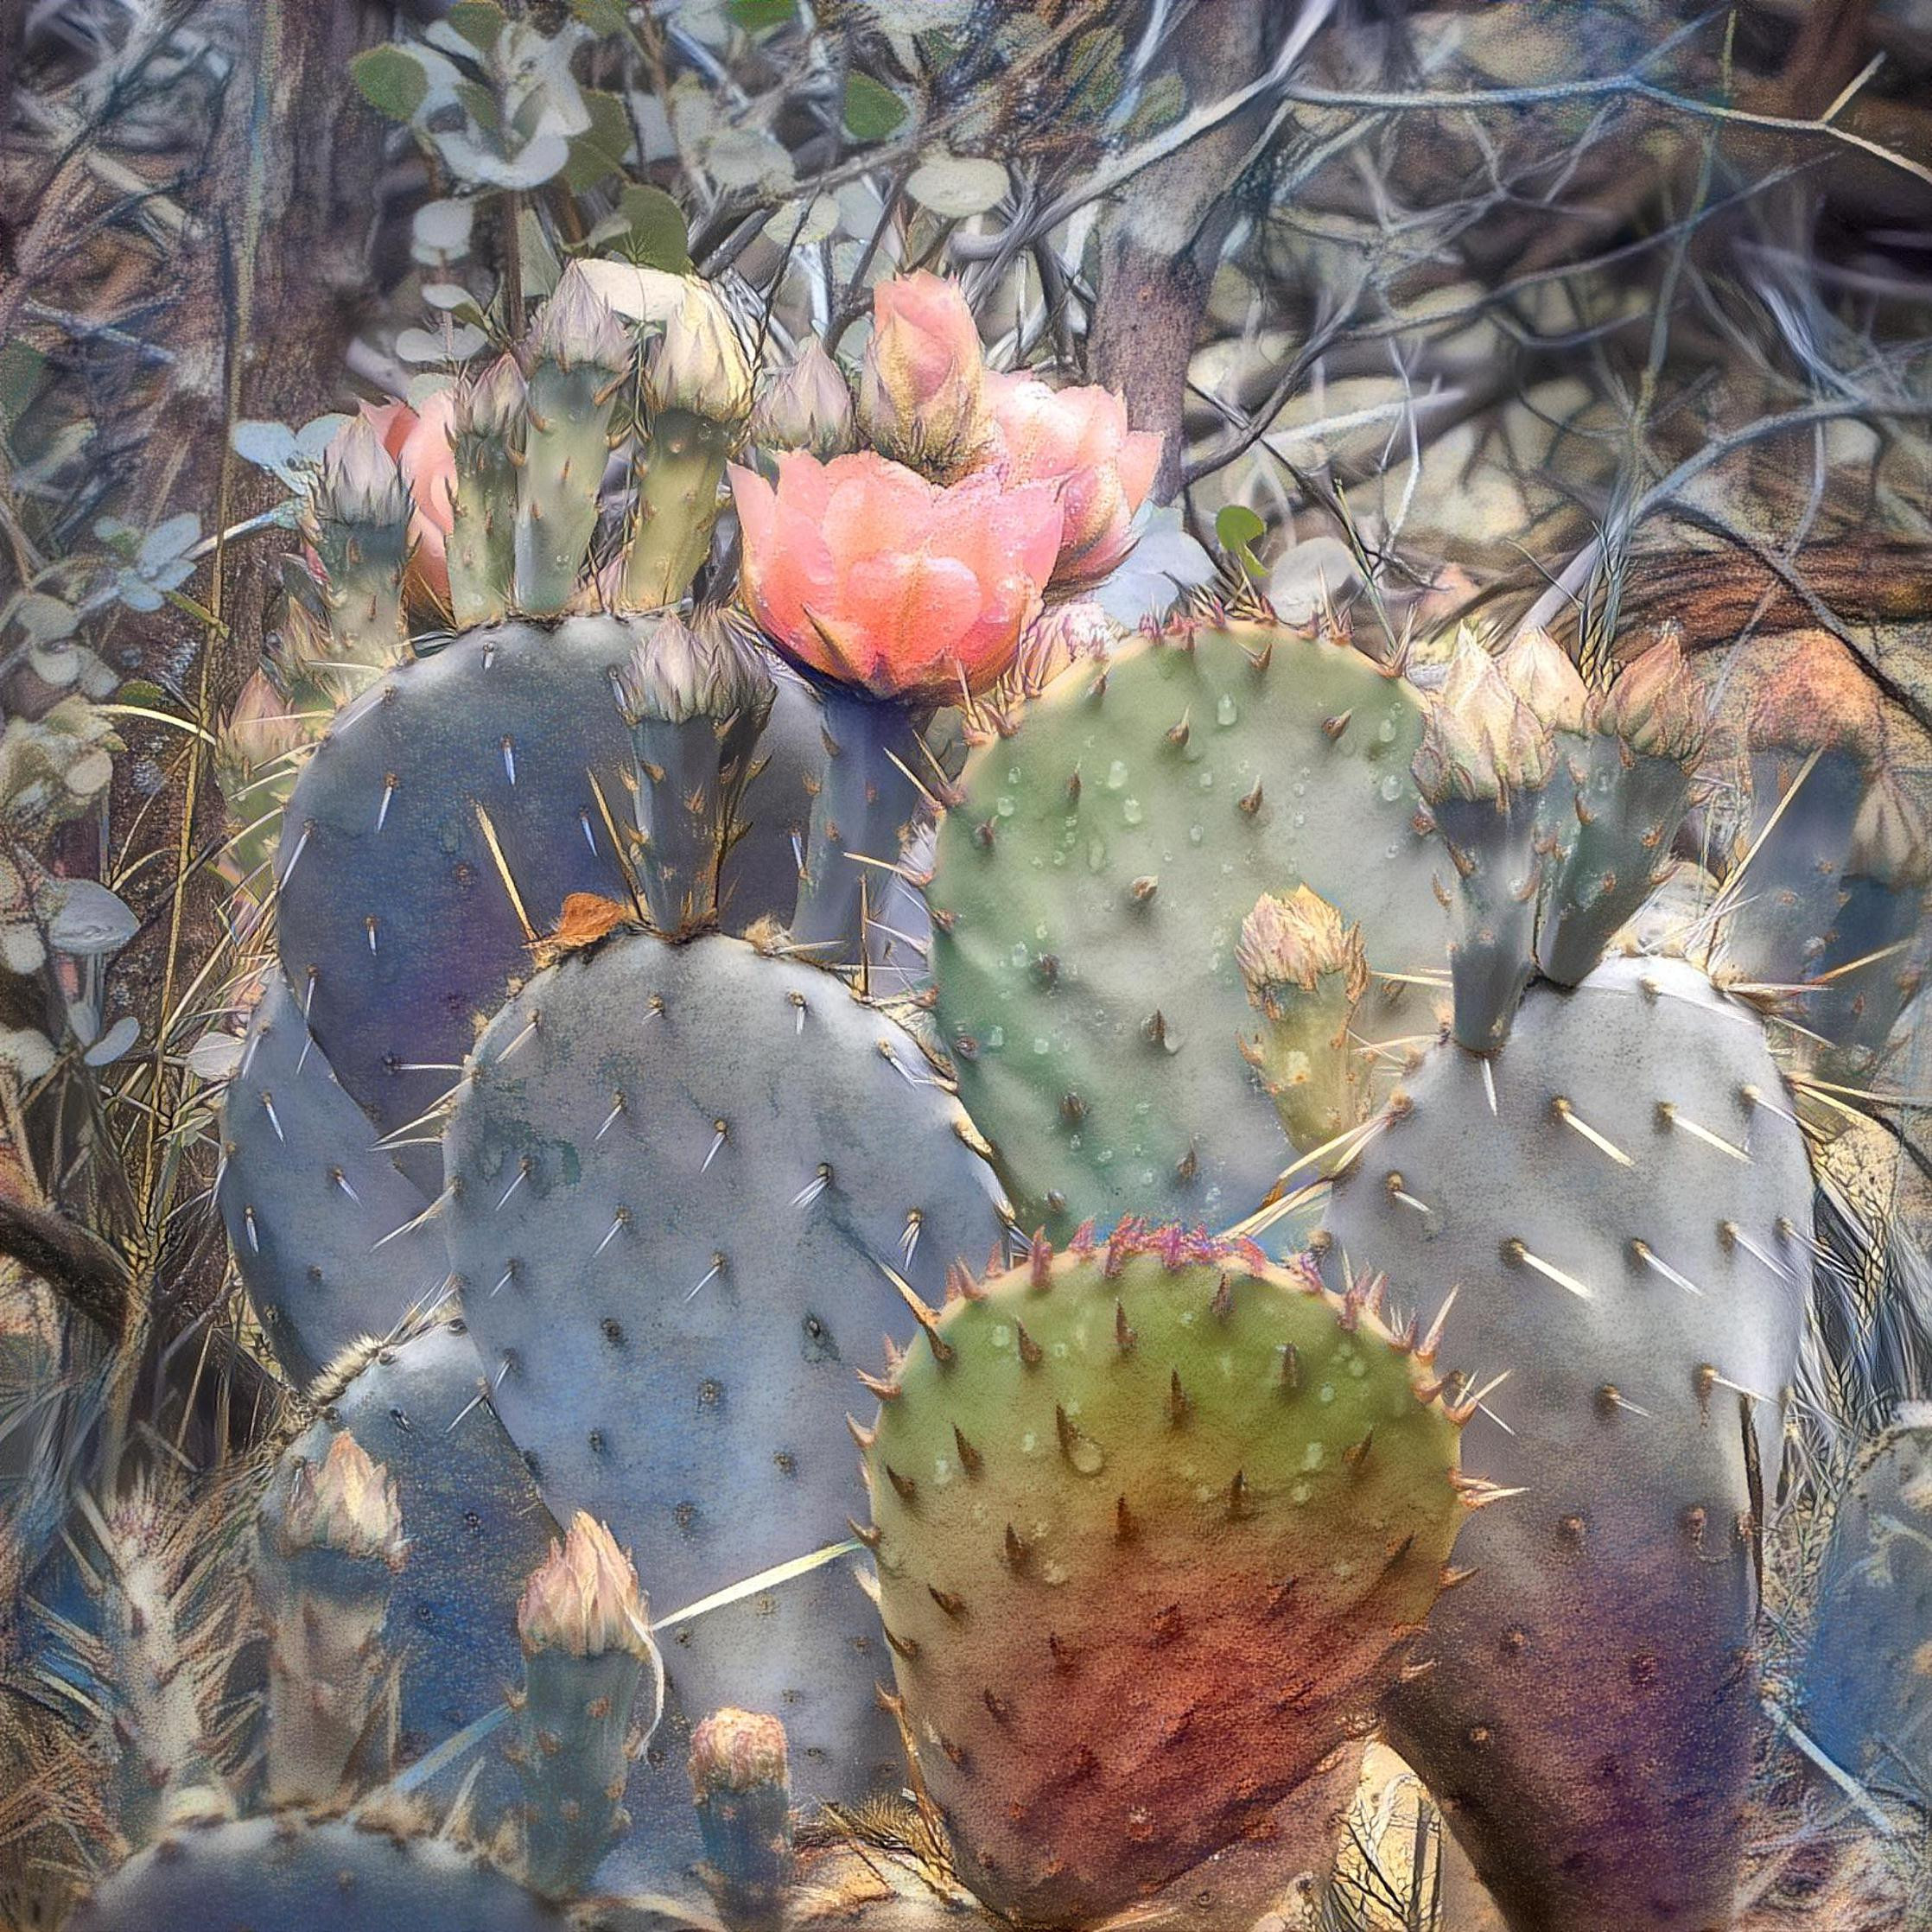 Prickly Pear in Bloom - Zion NP, UT